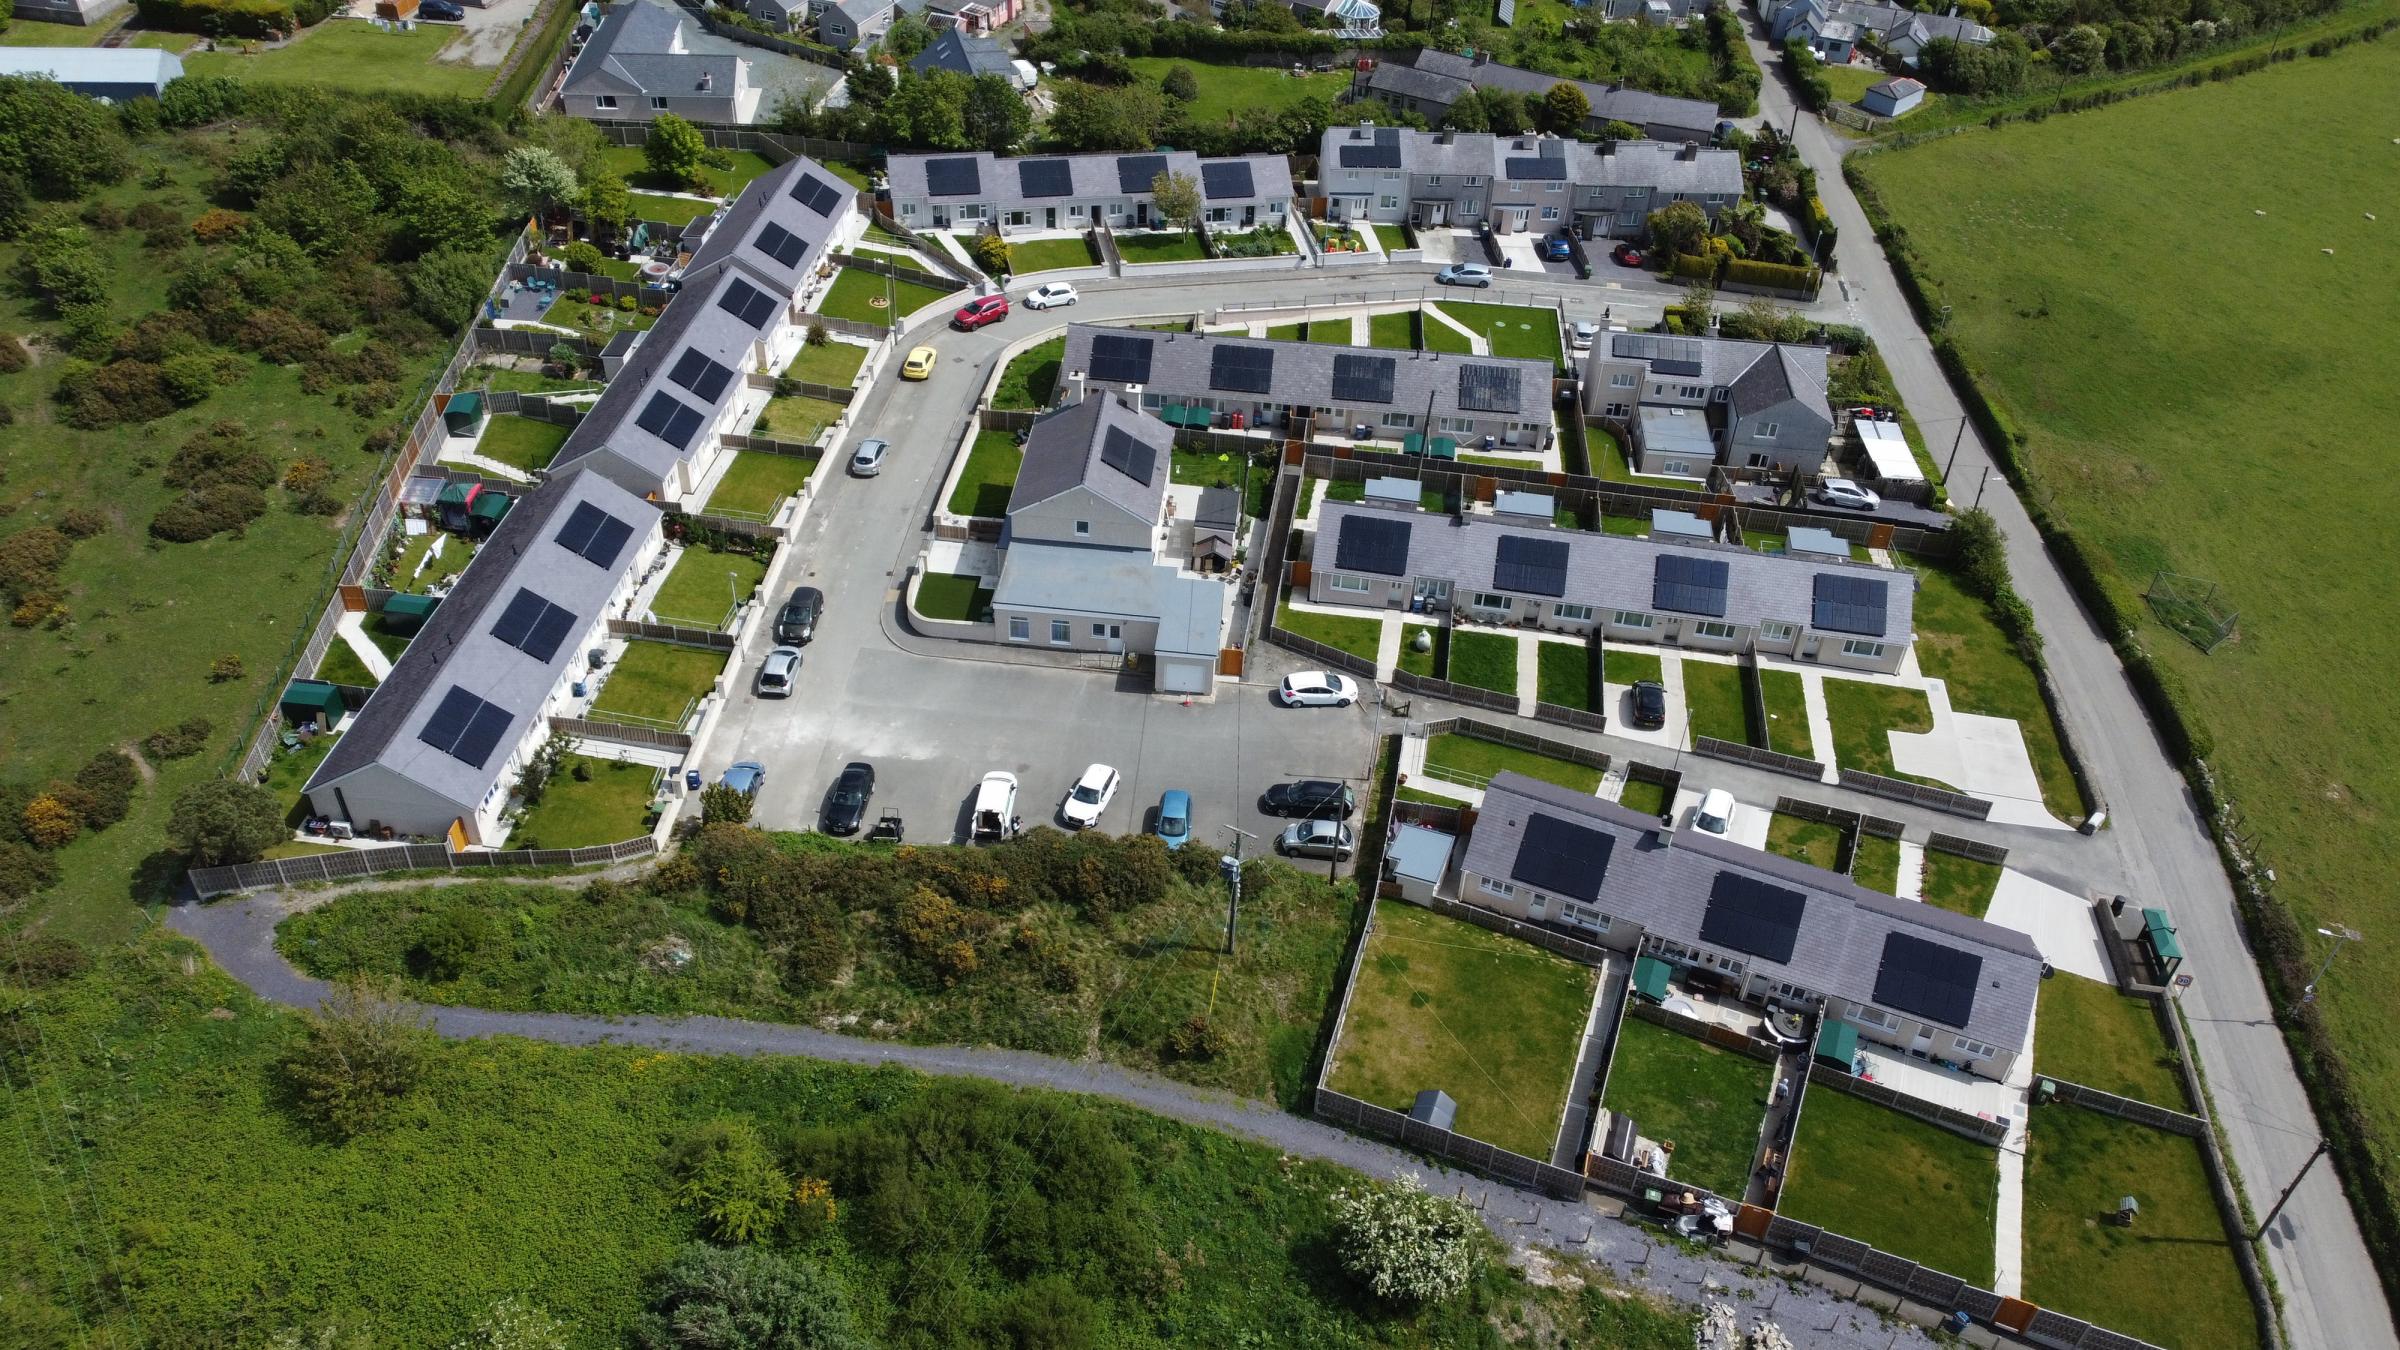 Llanddona council house improvements at Cae Gwyn (Drone image courtesy of Anglesey County Council)